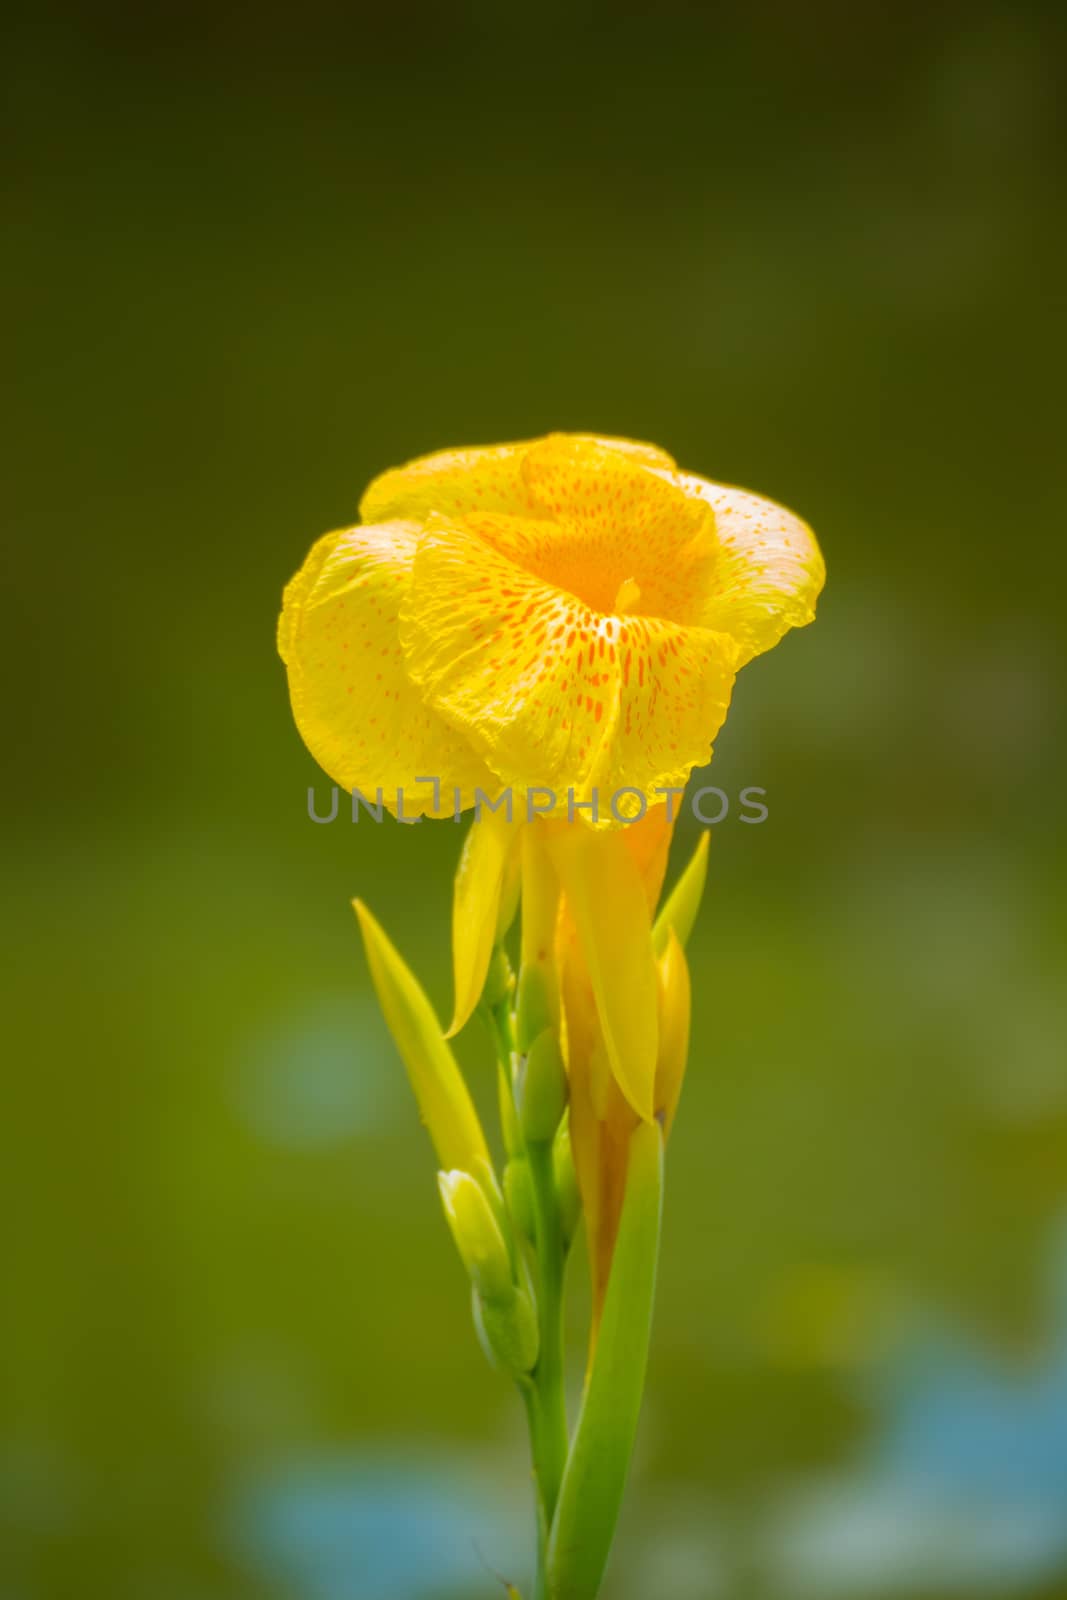 Radiant Canna Lily Blossom on a Summer Day by teerawit